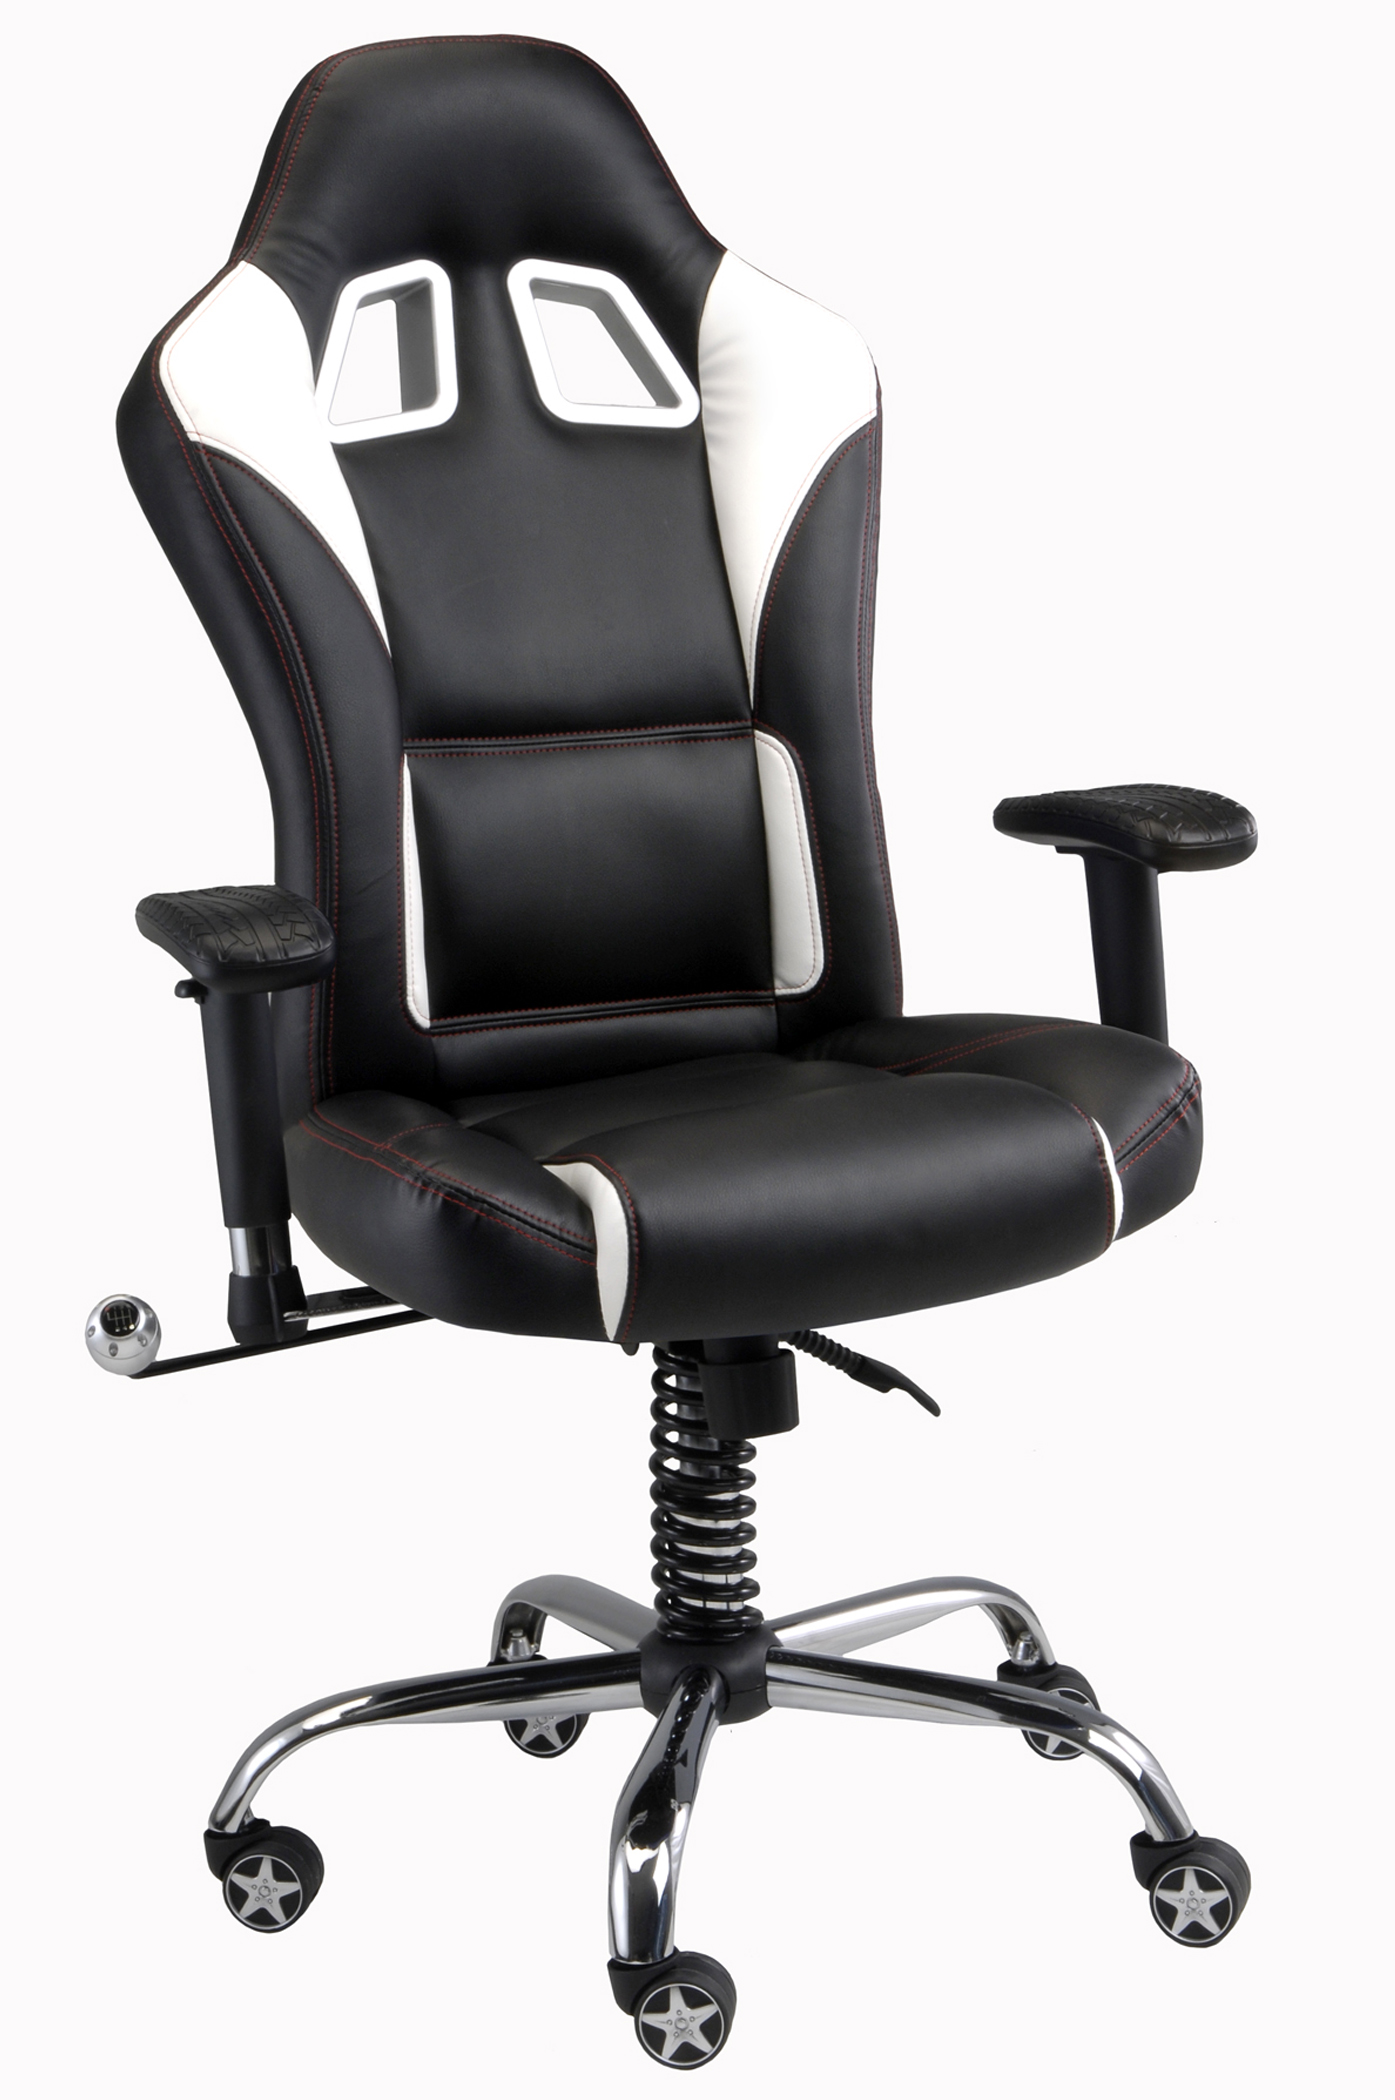 Intro-Tech Automotive, Pitstop Furniture, IN1100B SE Chair Black, Desk Chair